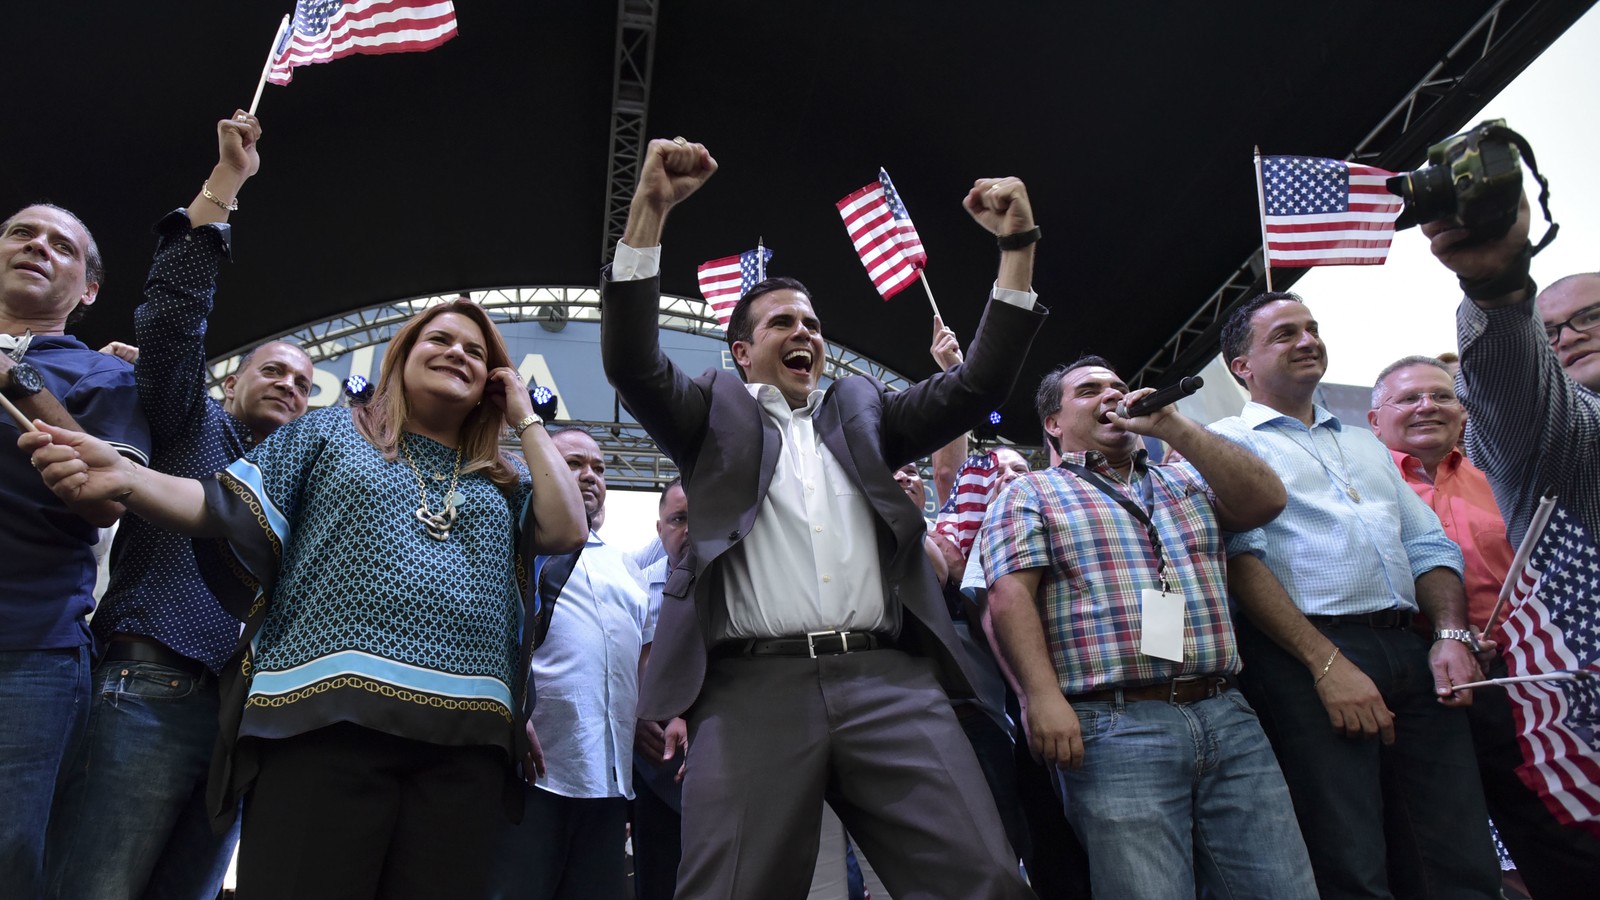 Puerto Rican statehood backers poised to take over oldest Latino